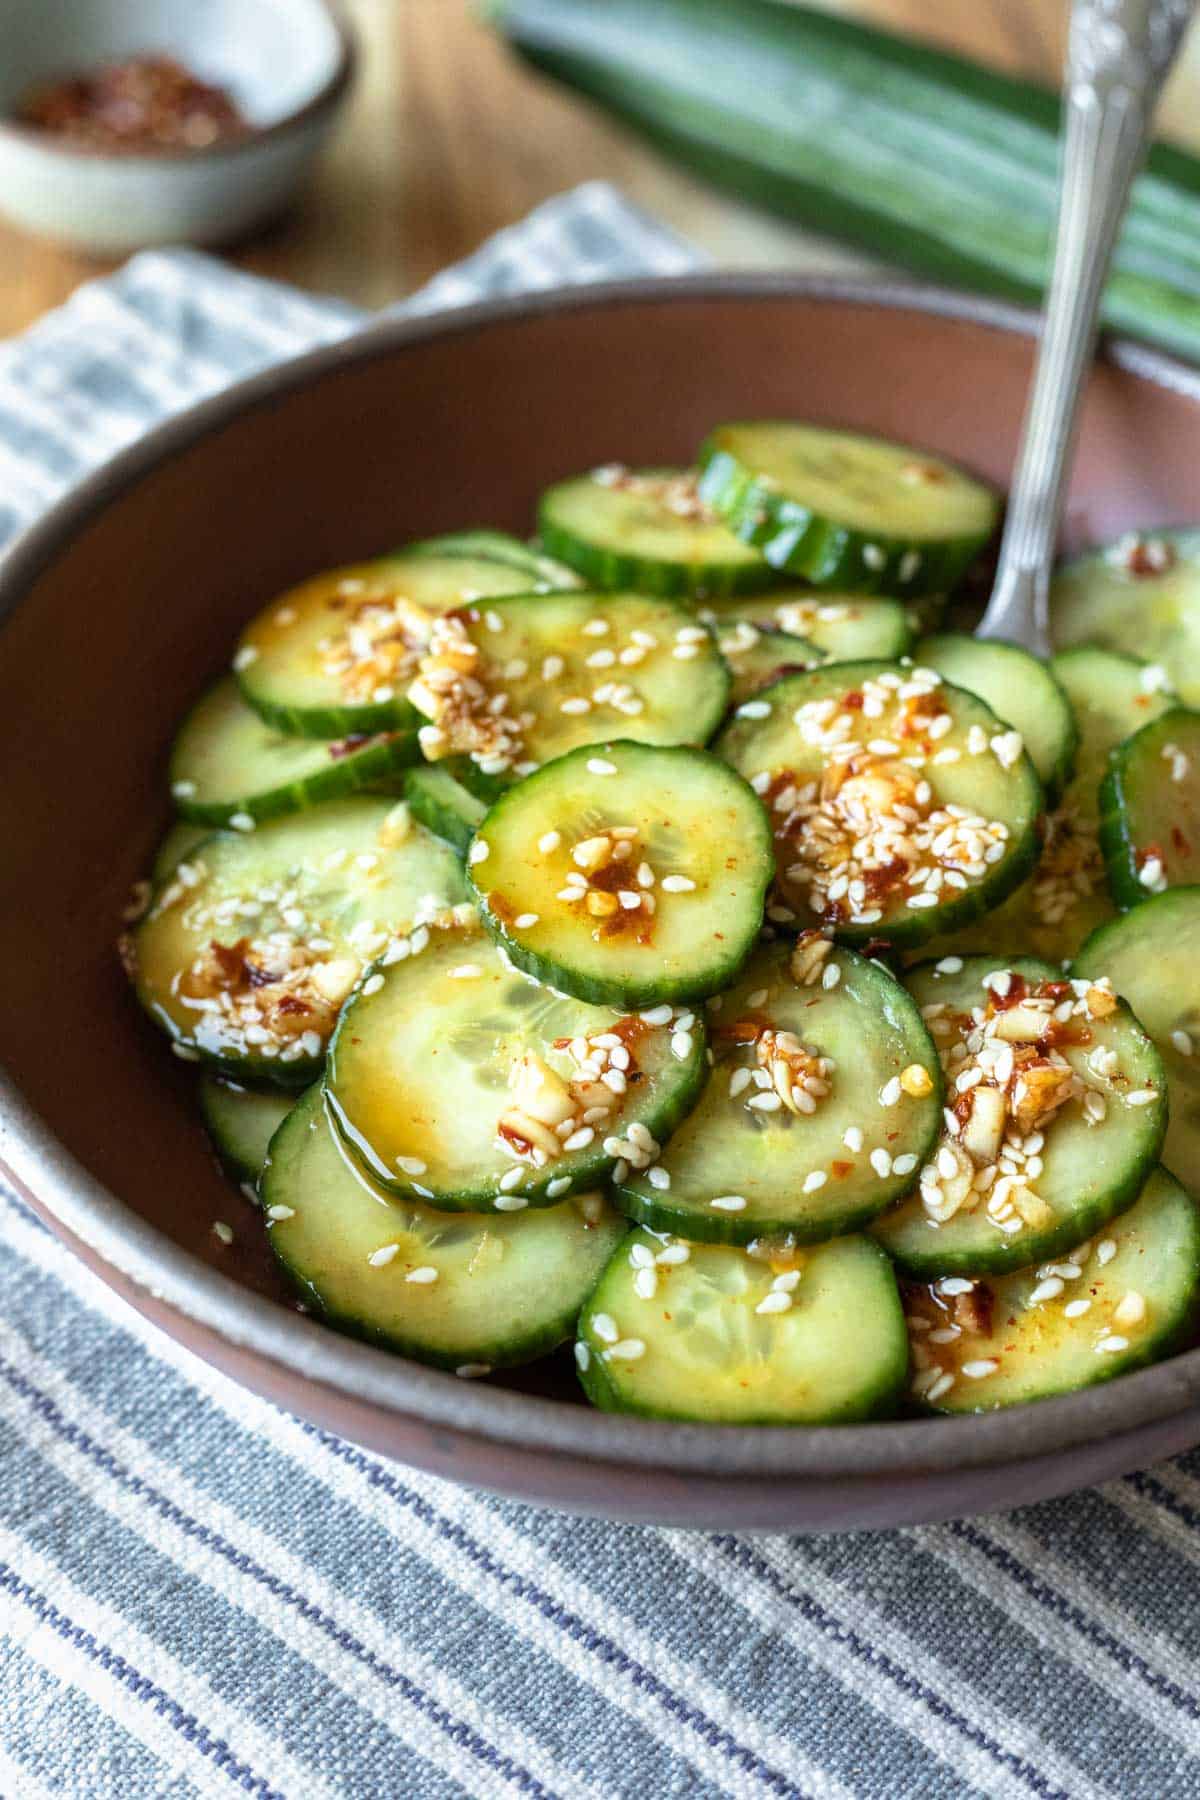 Serving bowl filled with spicy cucumber salad garnished with sesame seeds and chile flakes.